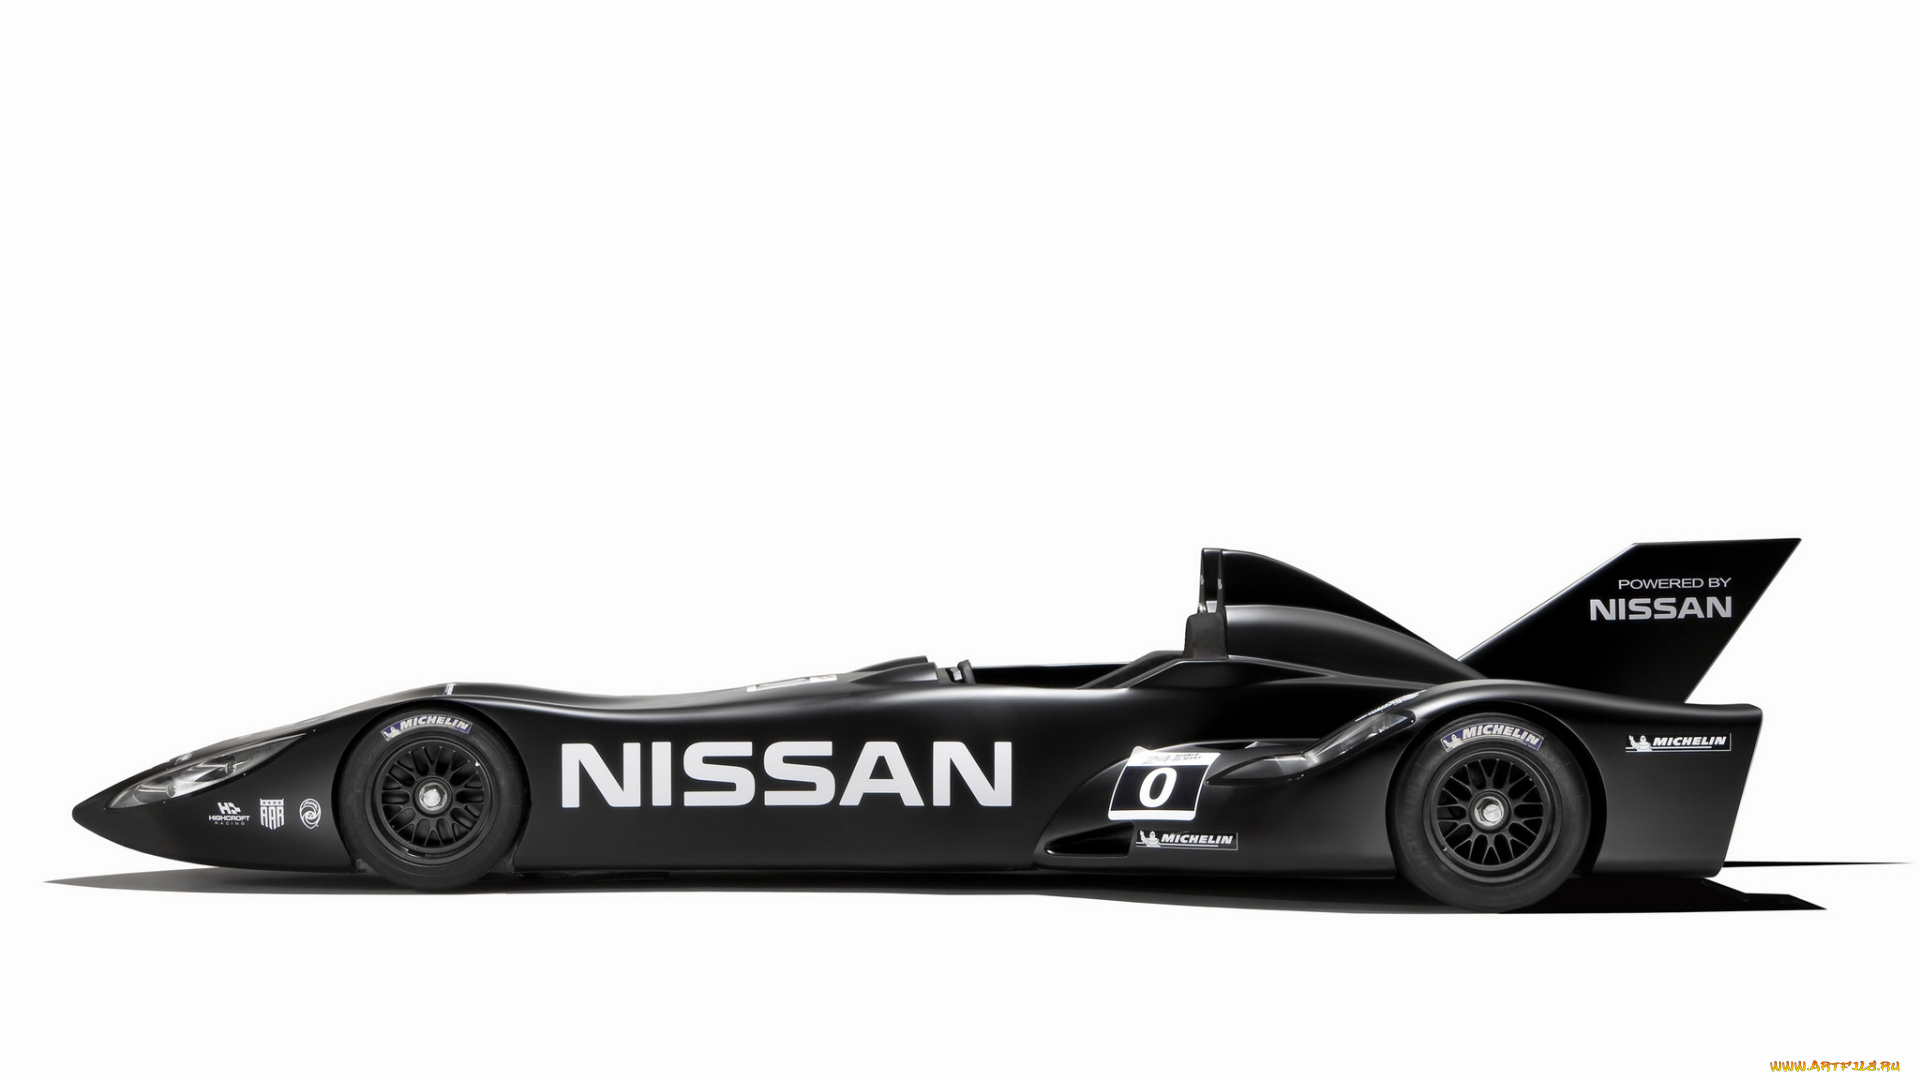 nissan, deltawing, experimental, concept, 2012, автомобили, nissan, datsun, deltawing, experimental, concept, 2012